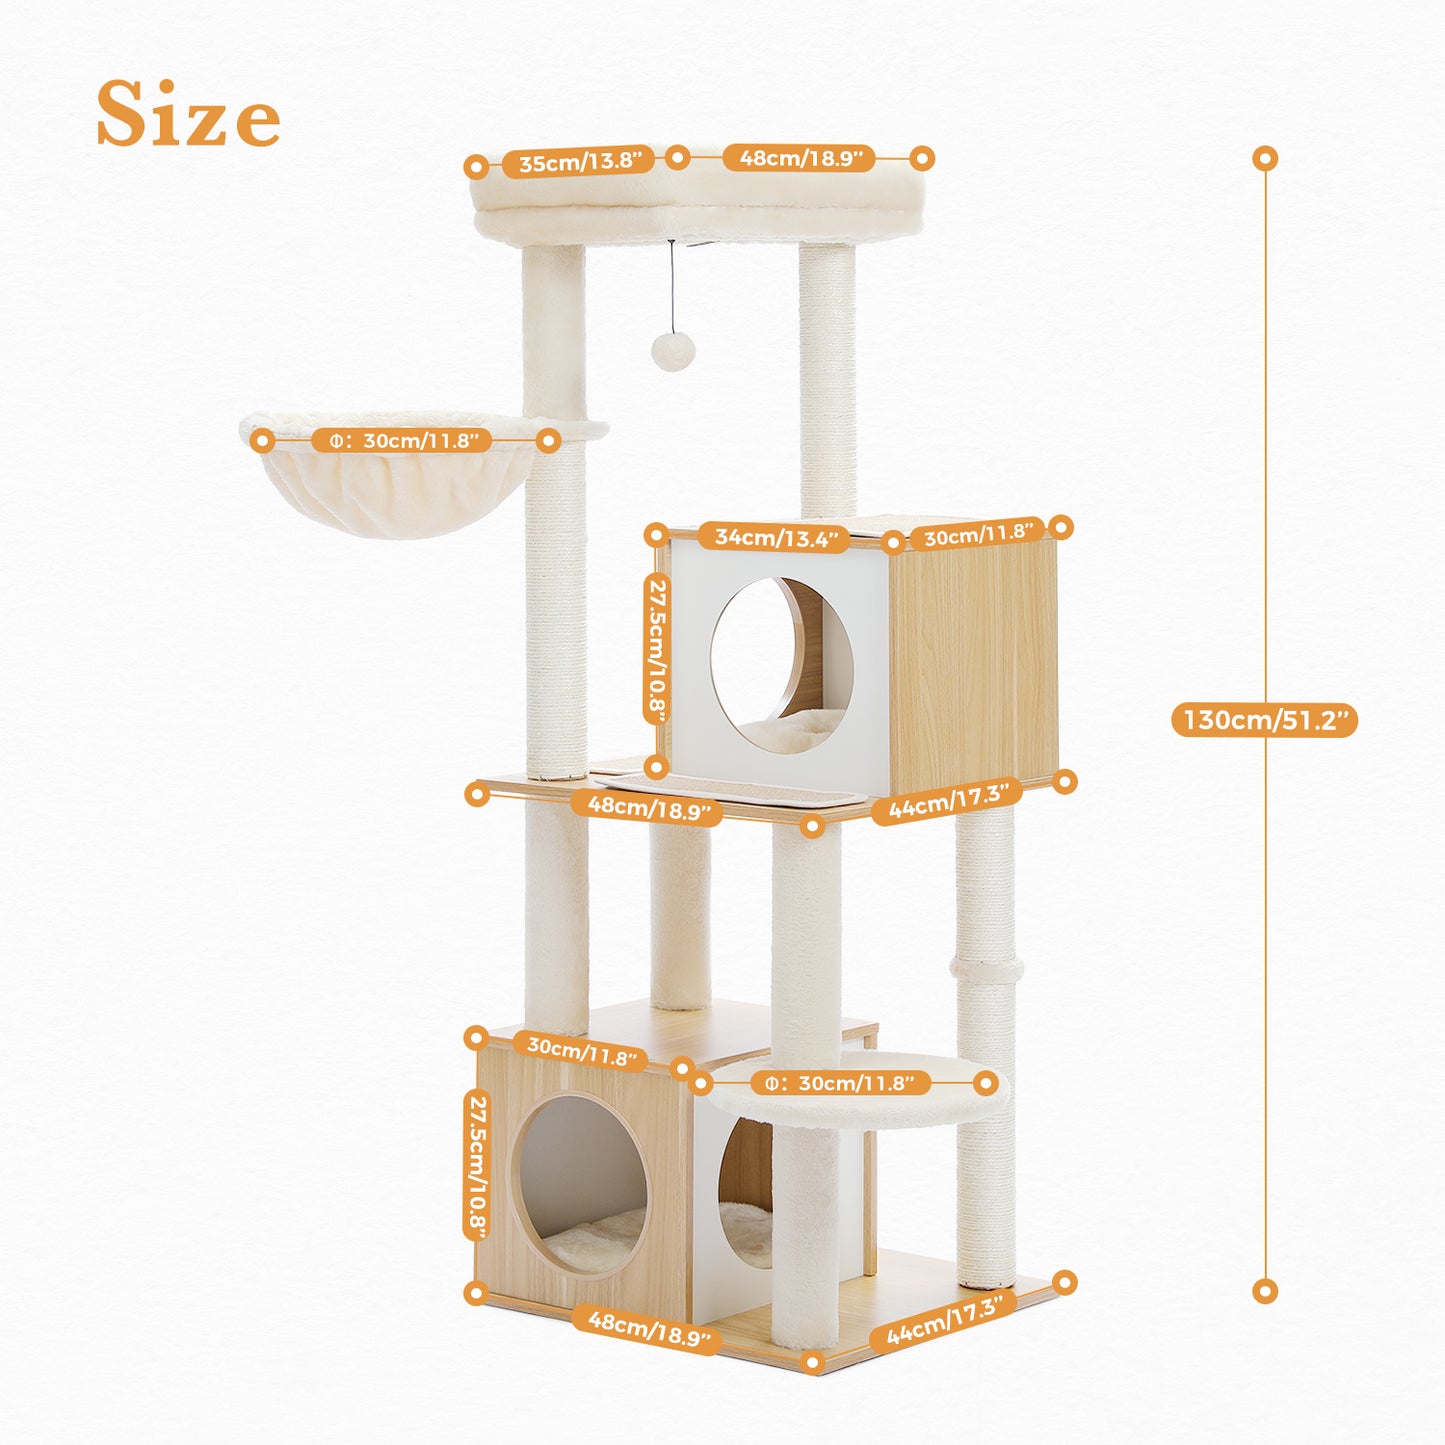 PAWZ Road Cat Tree Tower Scratching Post Wood Condo House Scracher Bed Toy 130cm Beige